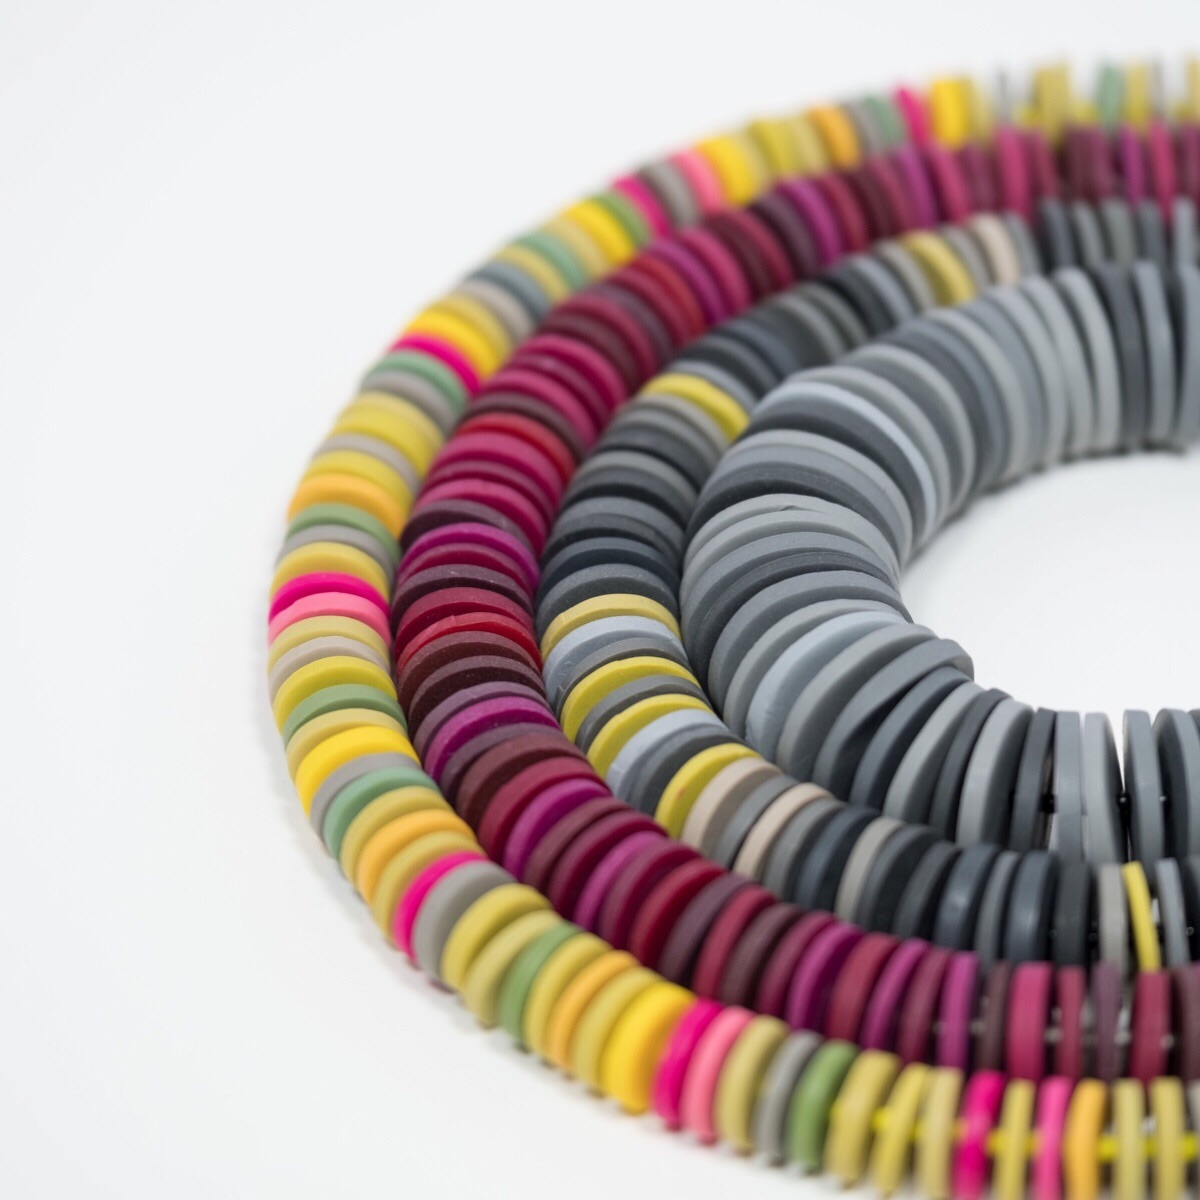 Handmade multicoloured handmade polymer bead necklaces by Colour Designs Jewellery